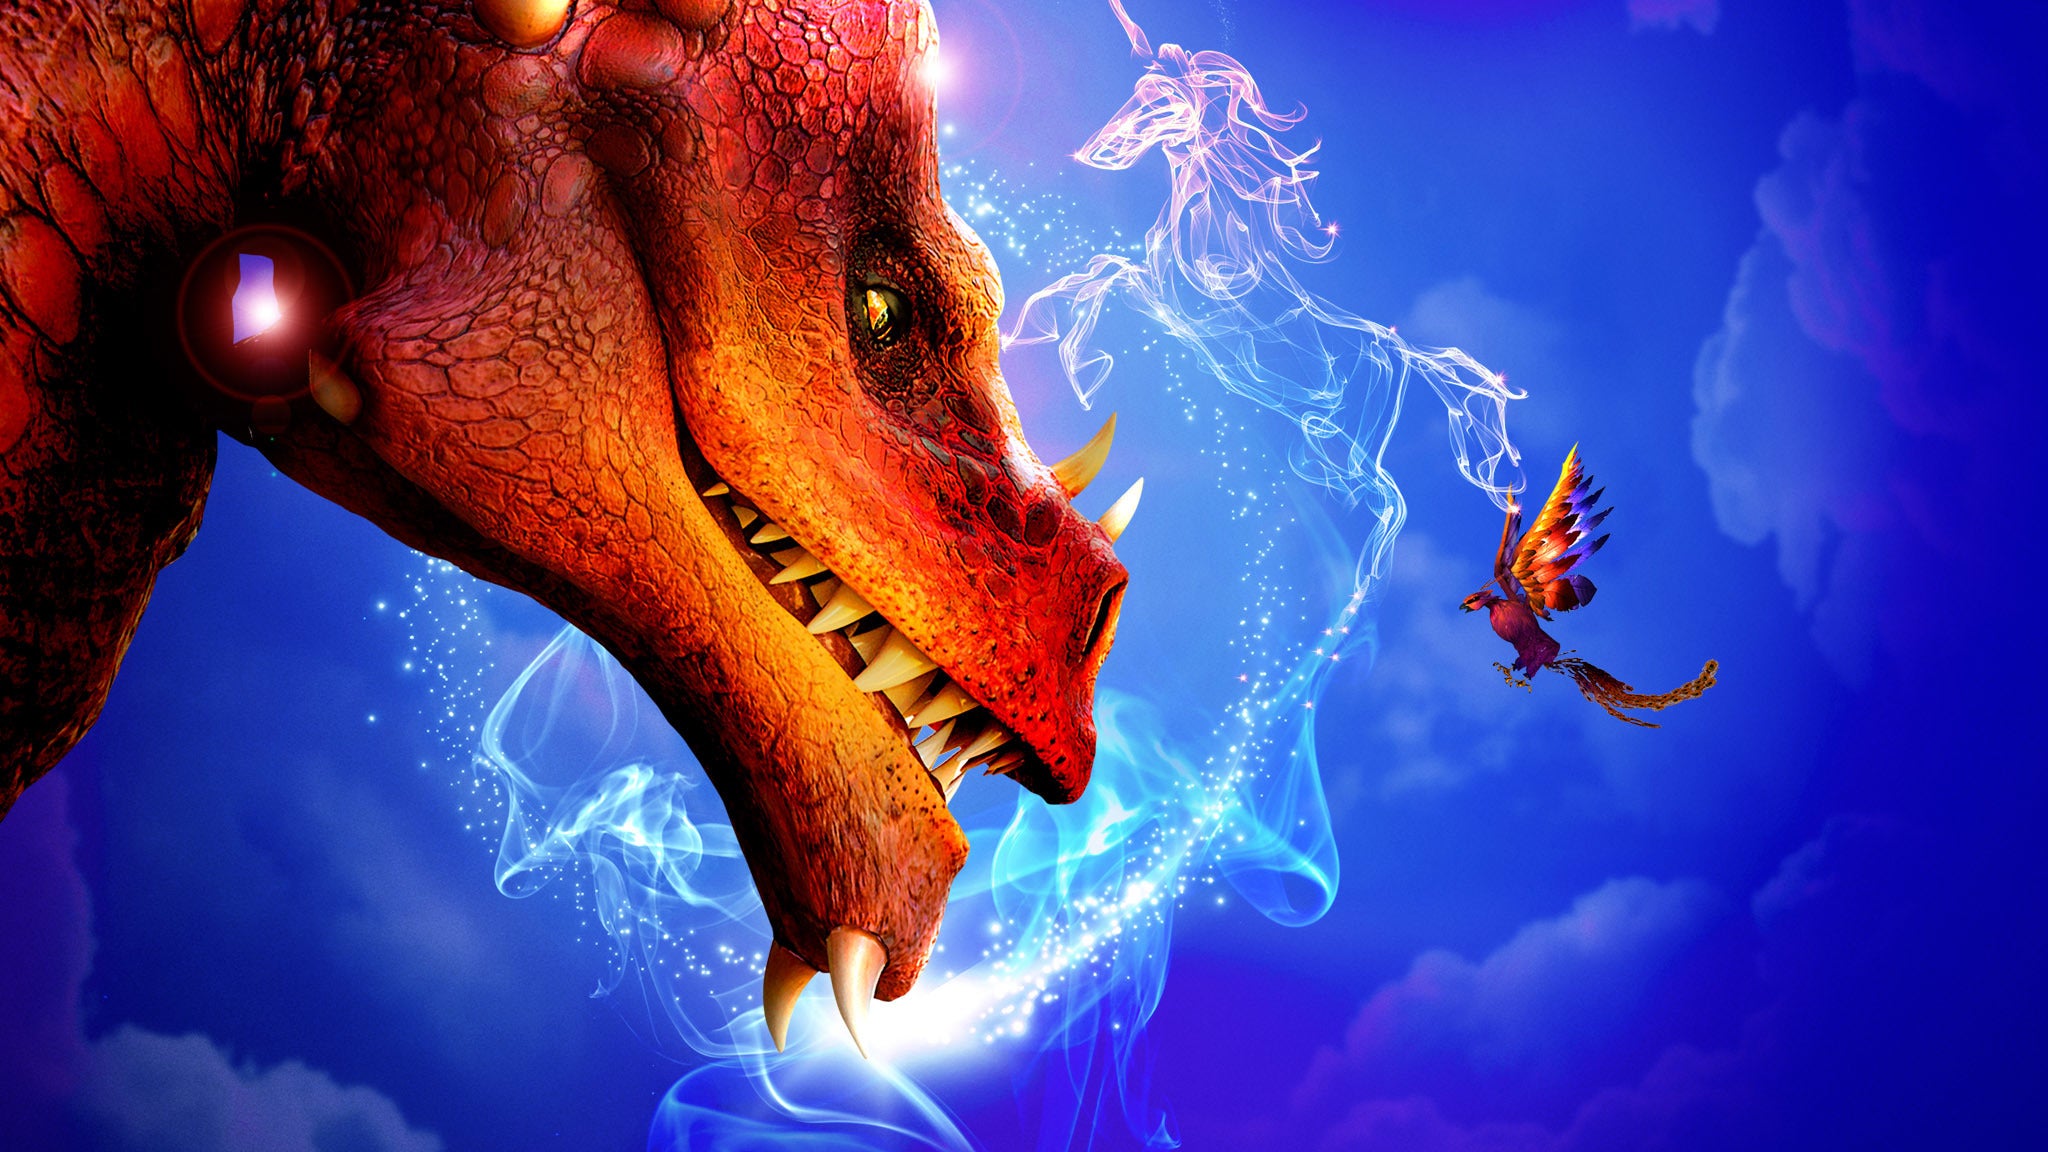 Dragons and Mythical Beasts in Anderson promo photo for Save 15%  presale offer code